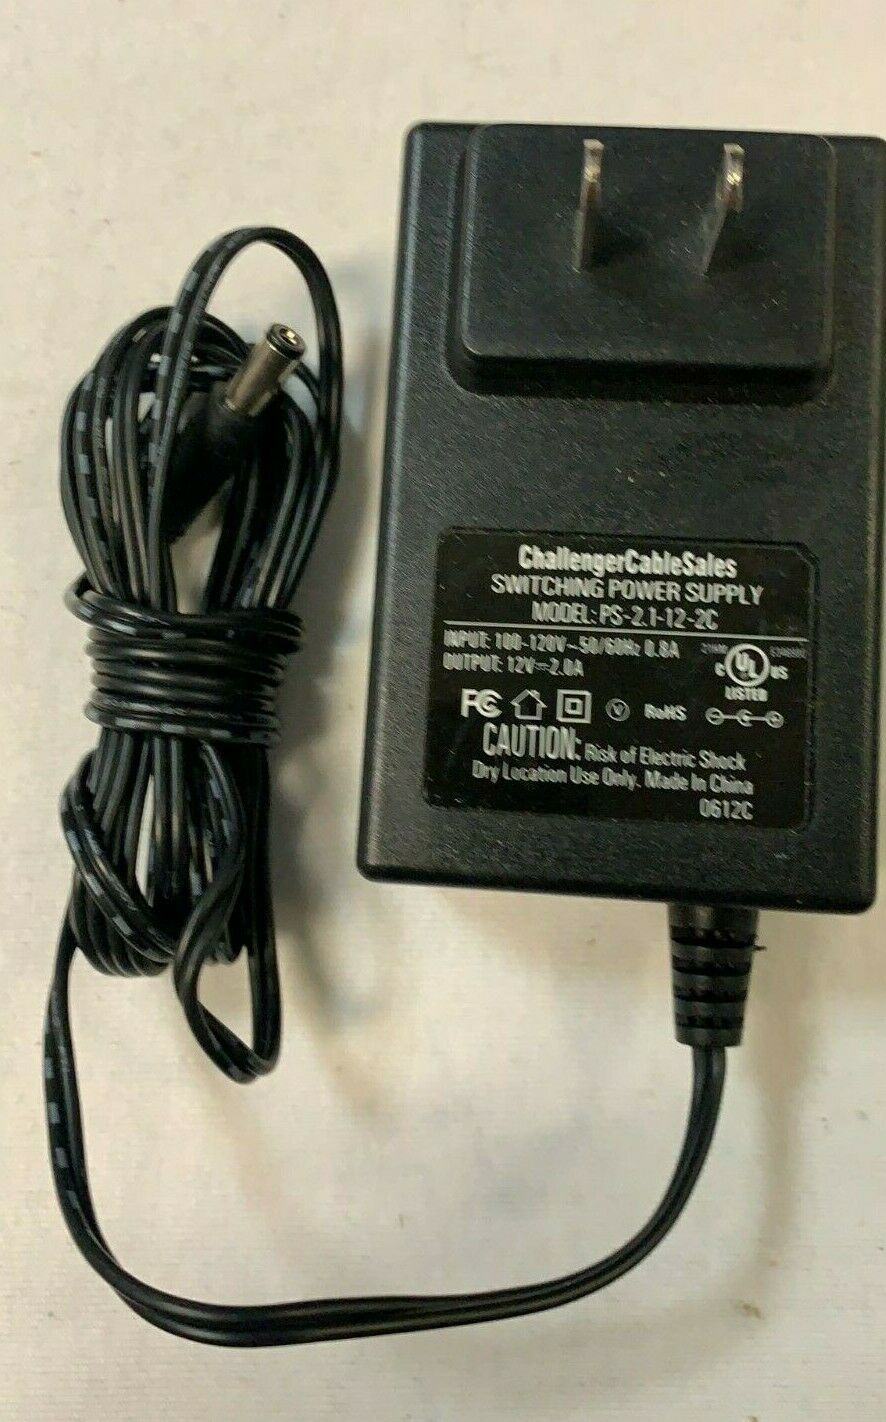 New, Challenger Cable, Power Supply PS-2.1-12-2C 12V 2.0A. Adapter. Type: Ad